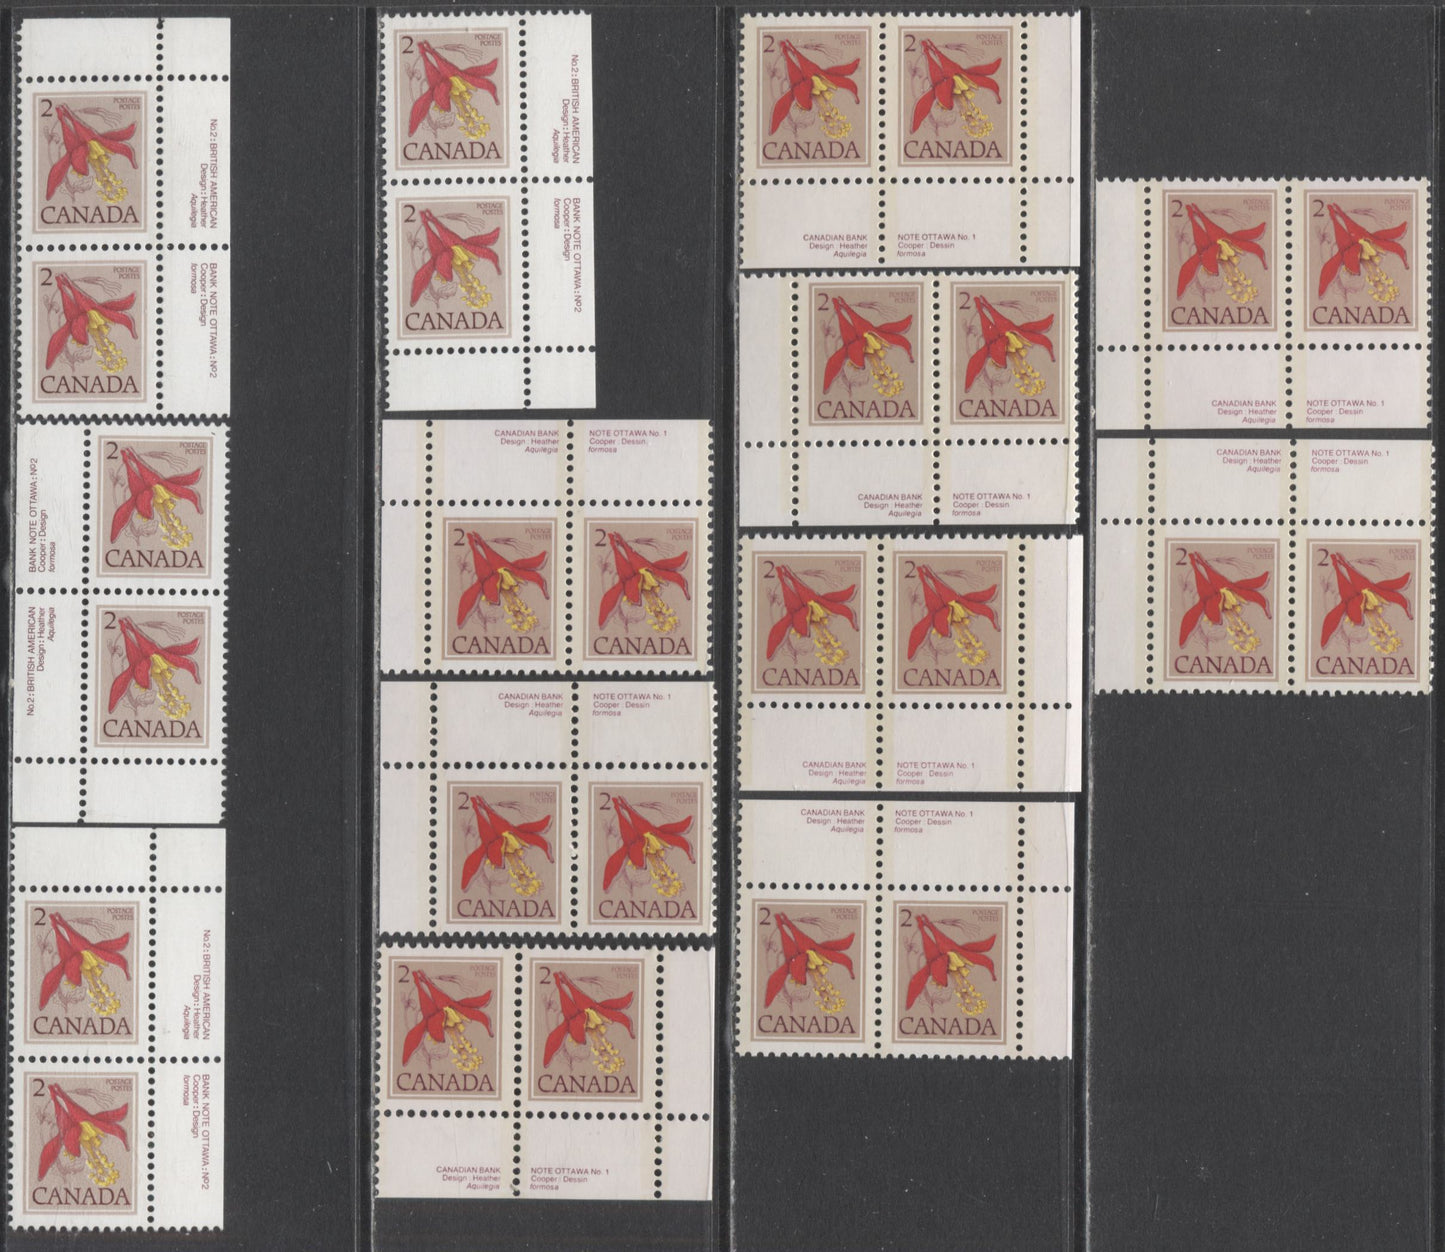 Lot 99 Canada #707, 782-iii, 782a-ai 2c Western Columbine, 1977-1982 Floral Issue A Specialized Lot of VFNH Inscription Pairs on Different Papers, Including Shades, and Colour Shifts